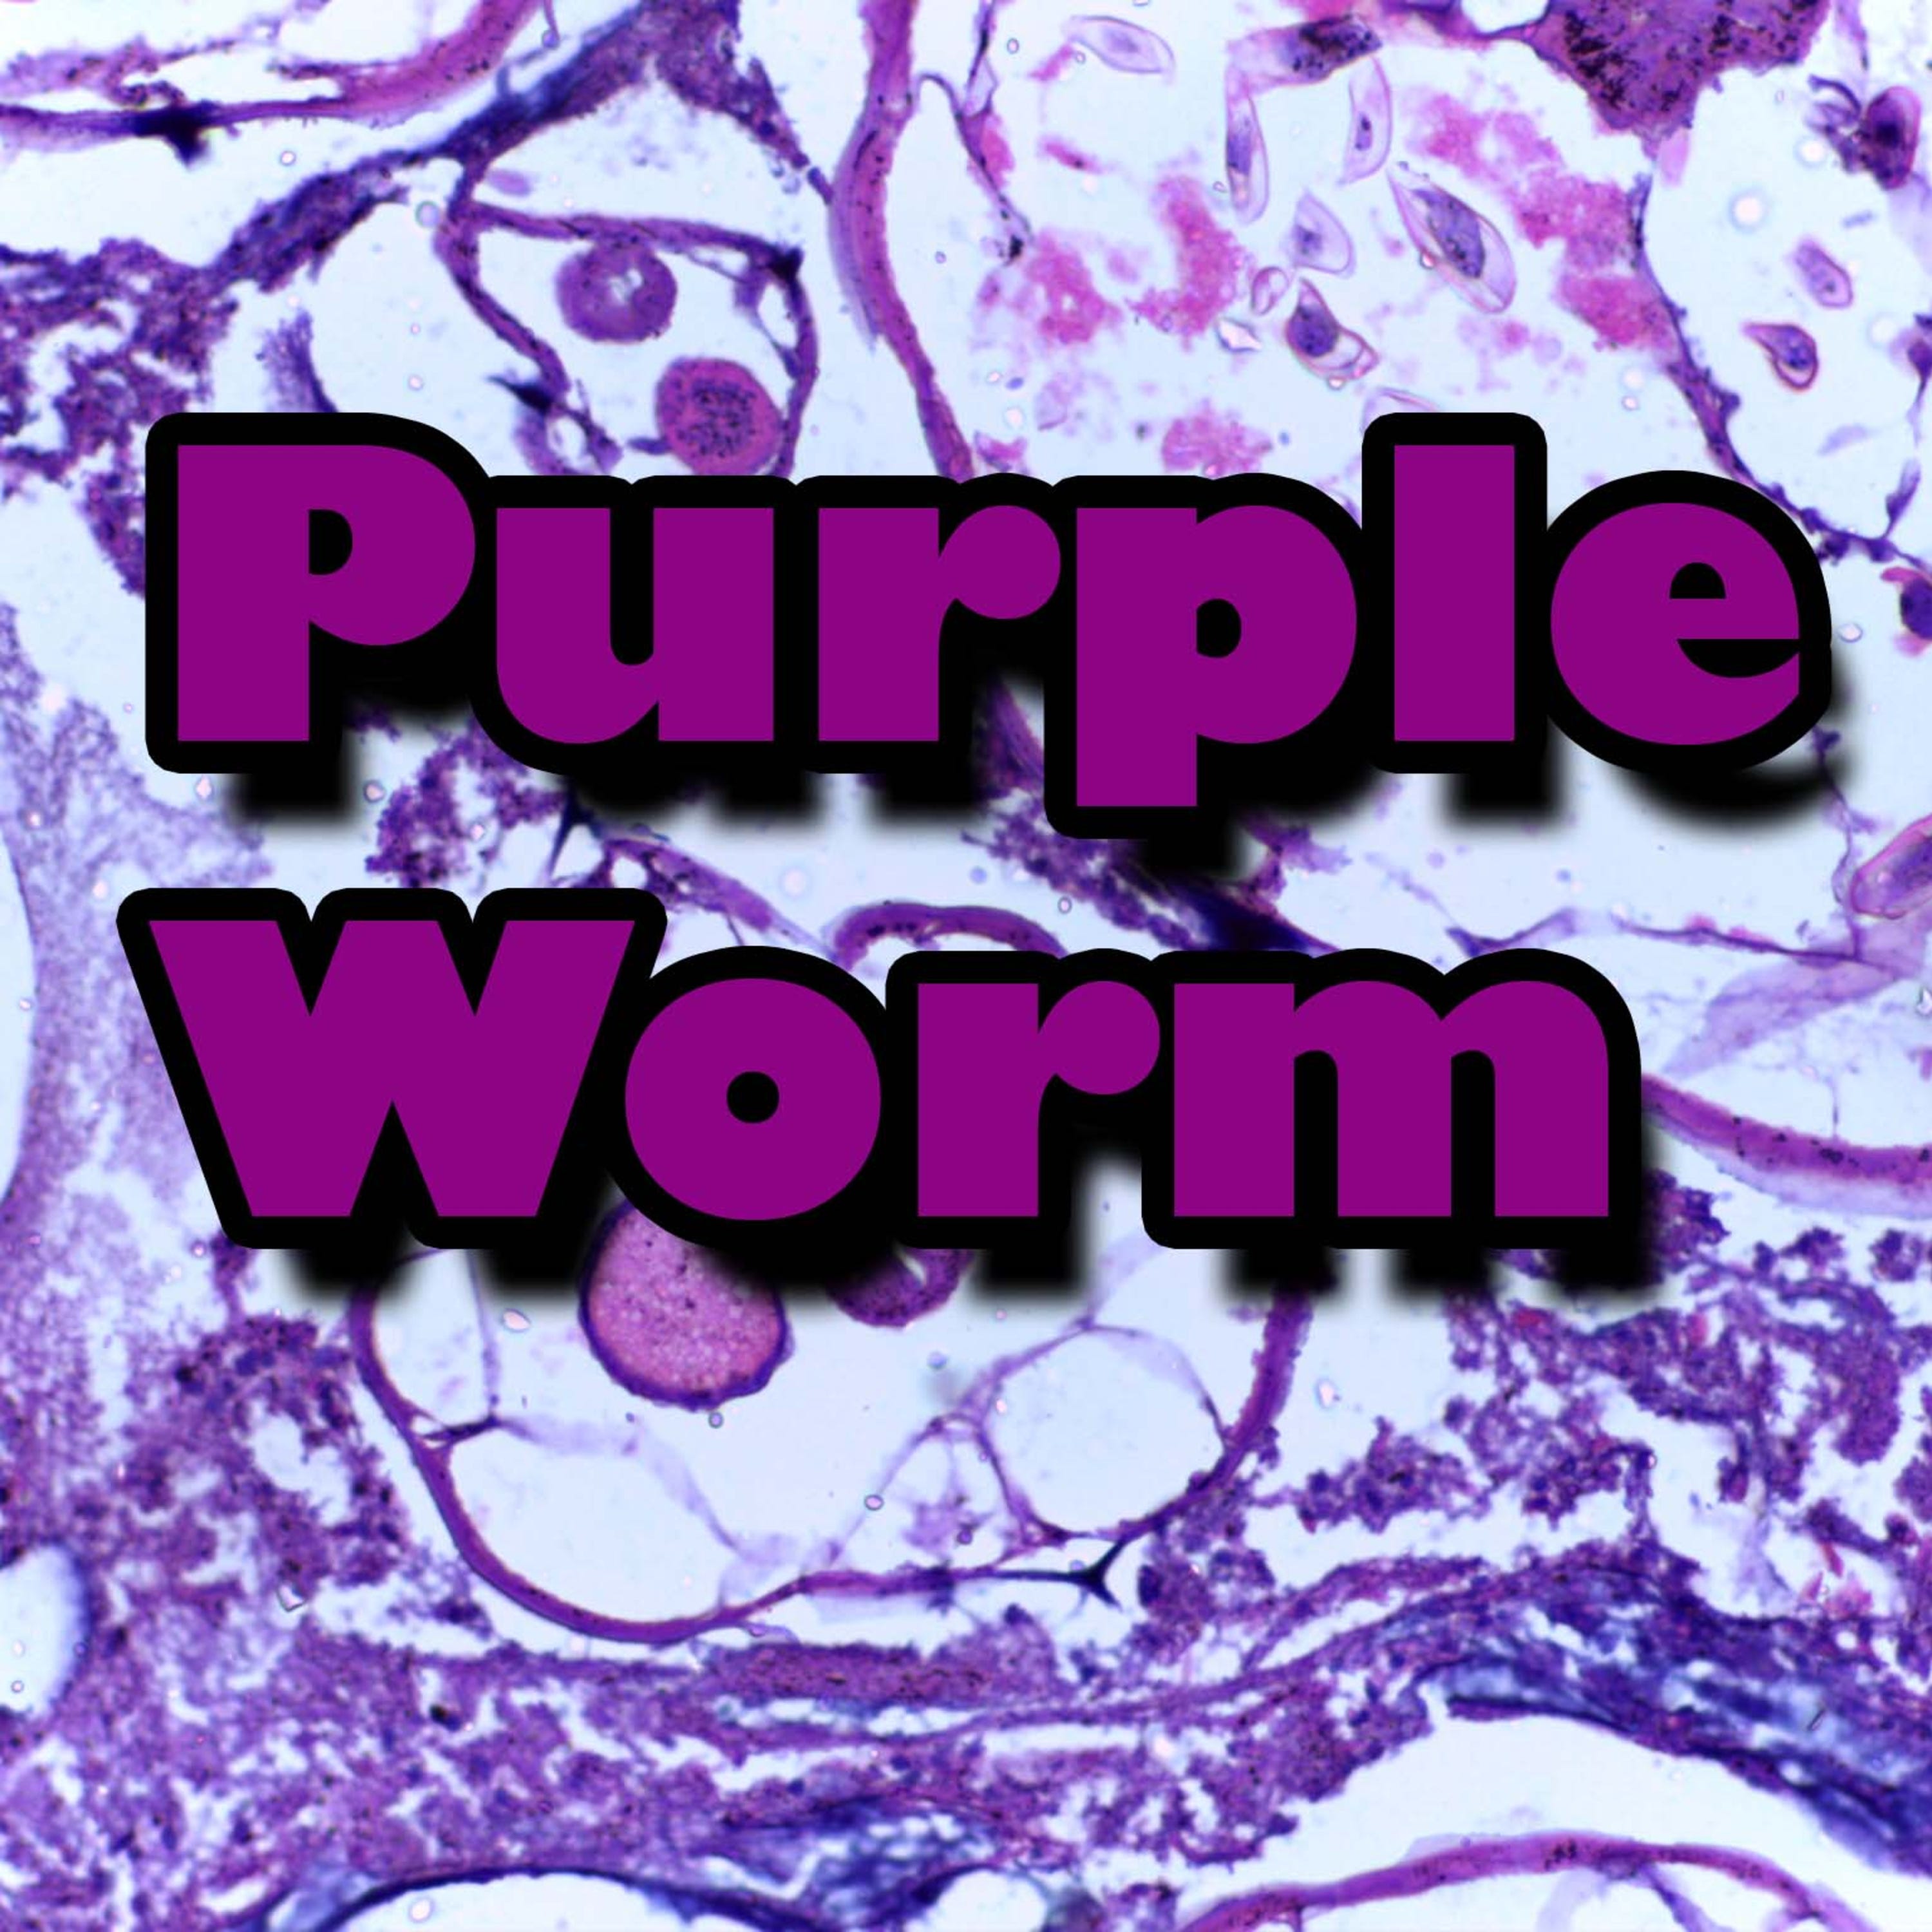 Wormsign! The first episode of the Purple Worm draws near